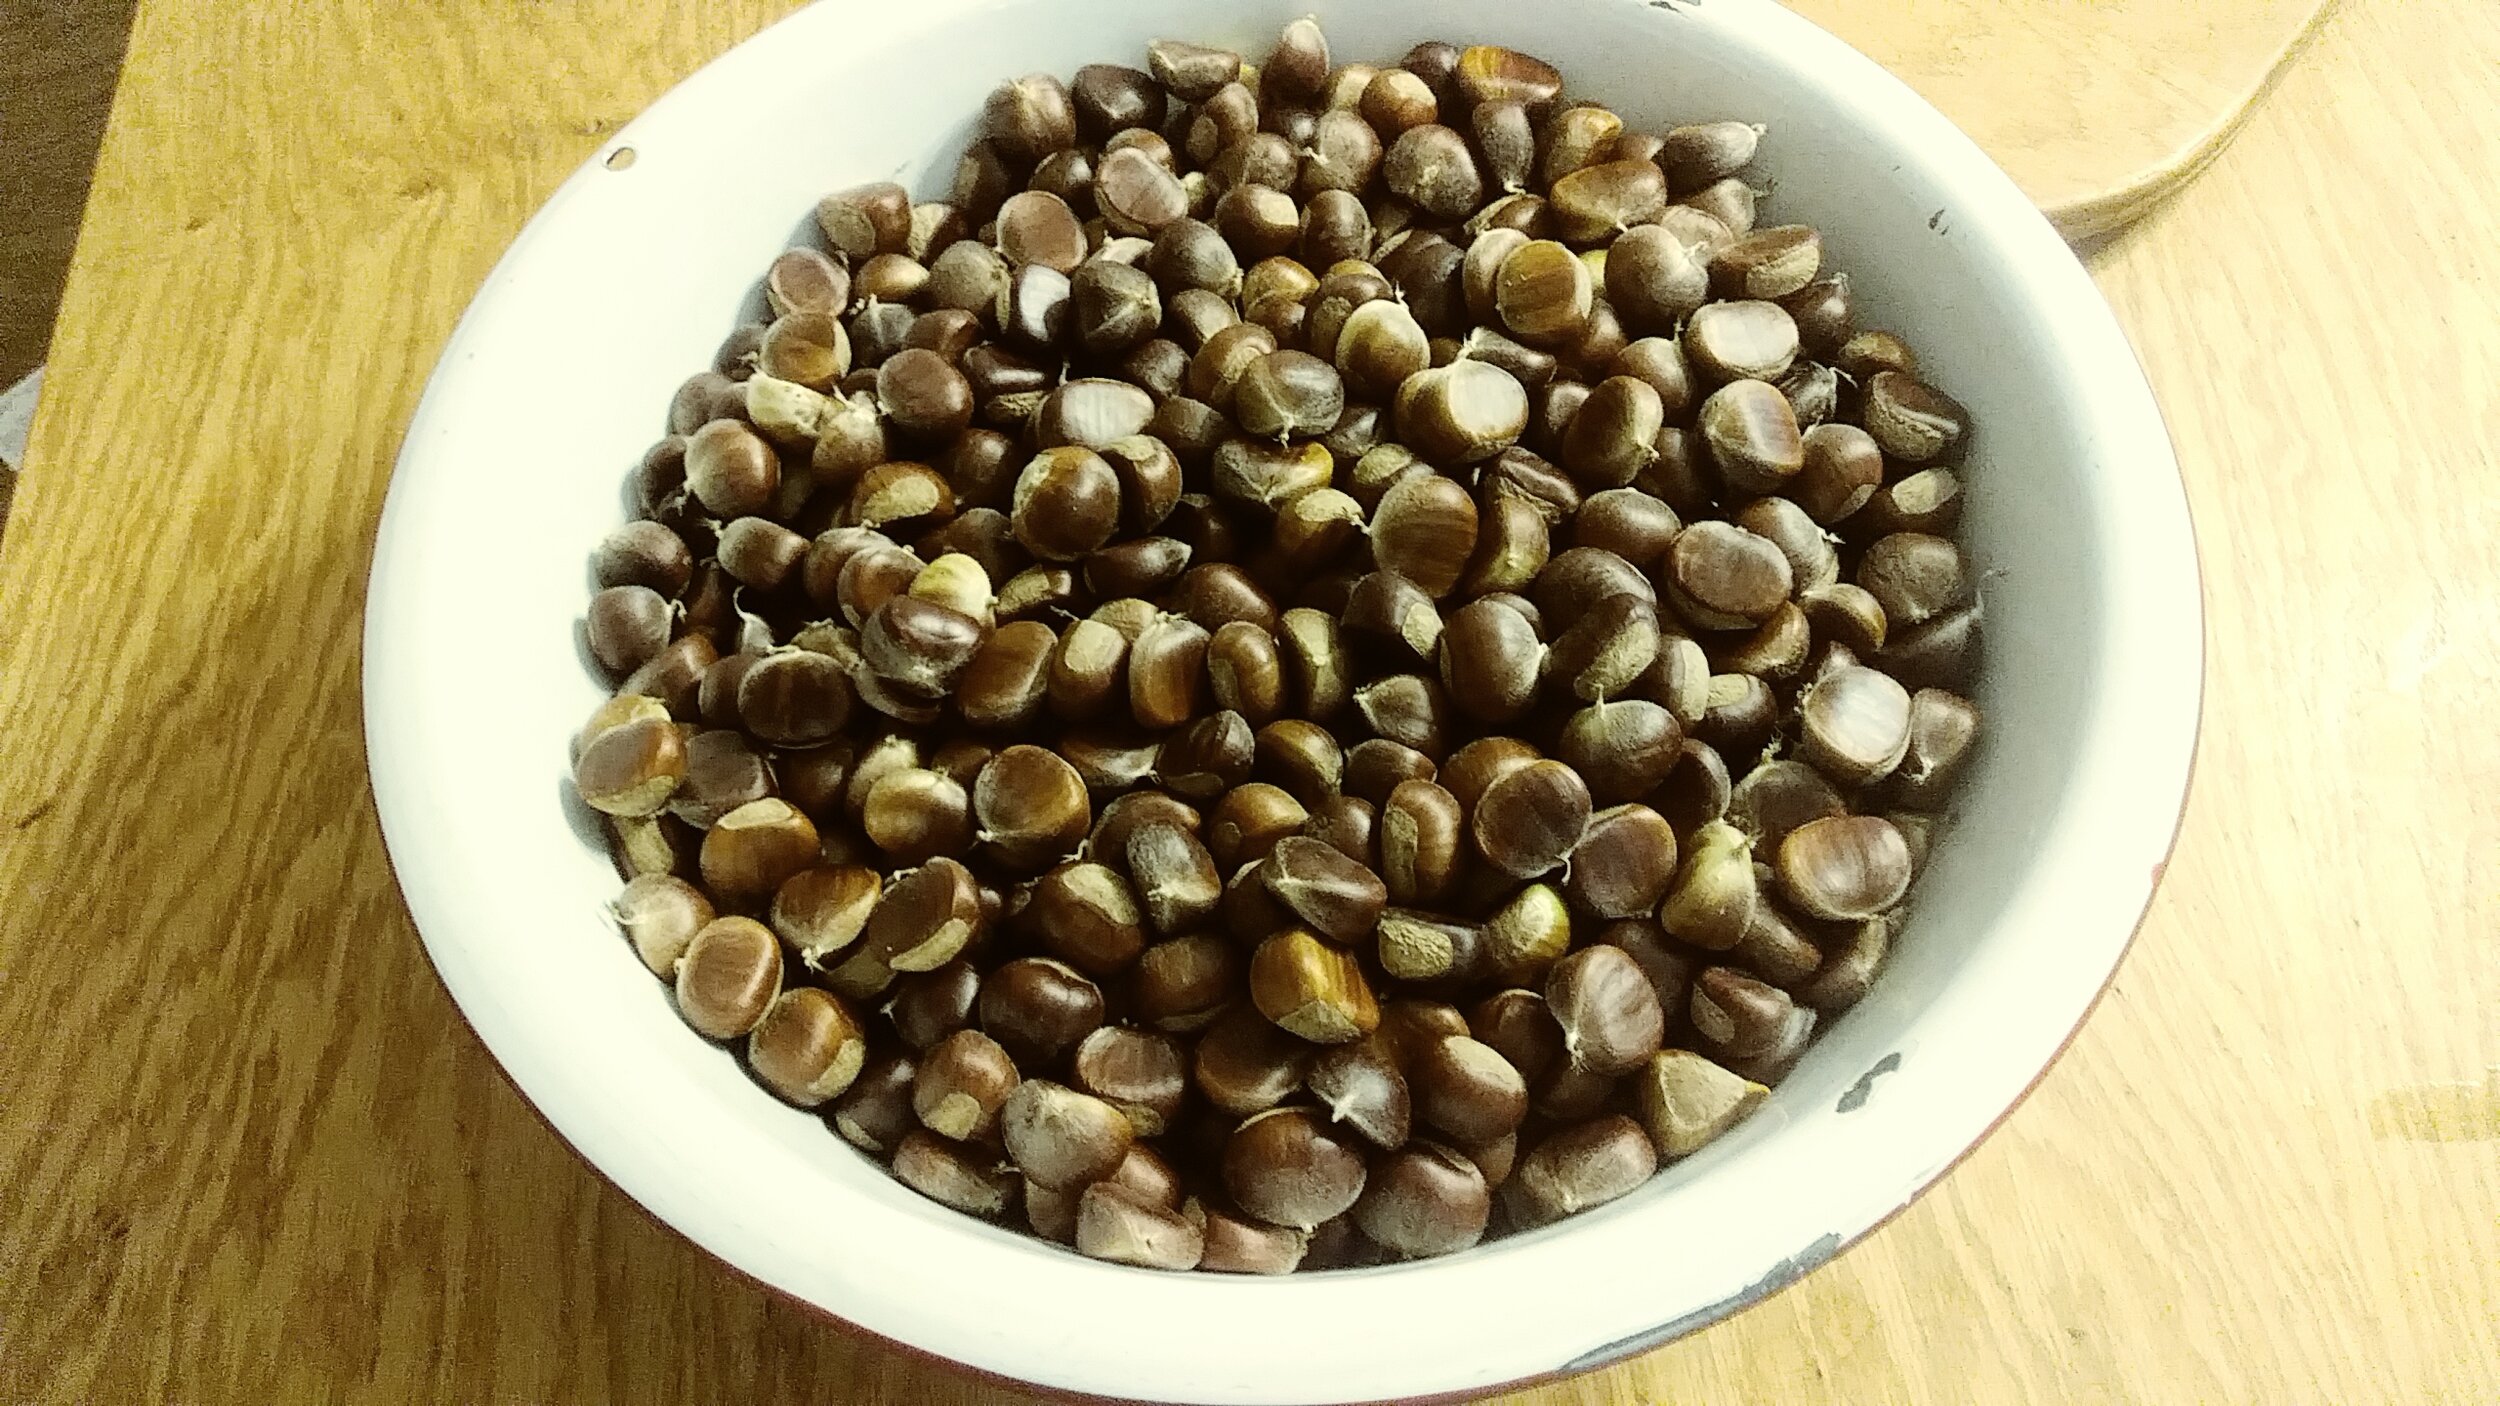  About 10 of the 150 lbs of chestnuts. 